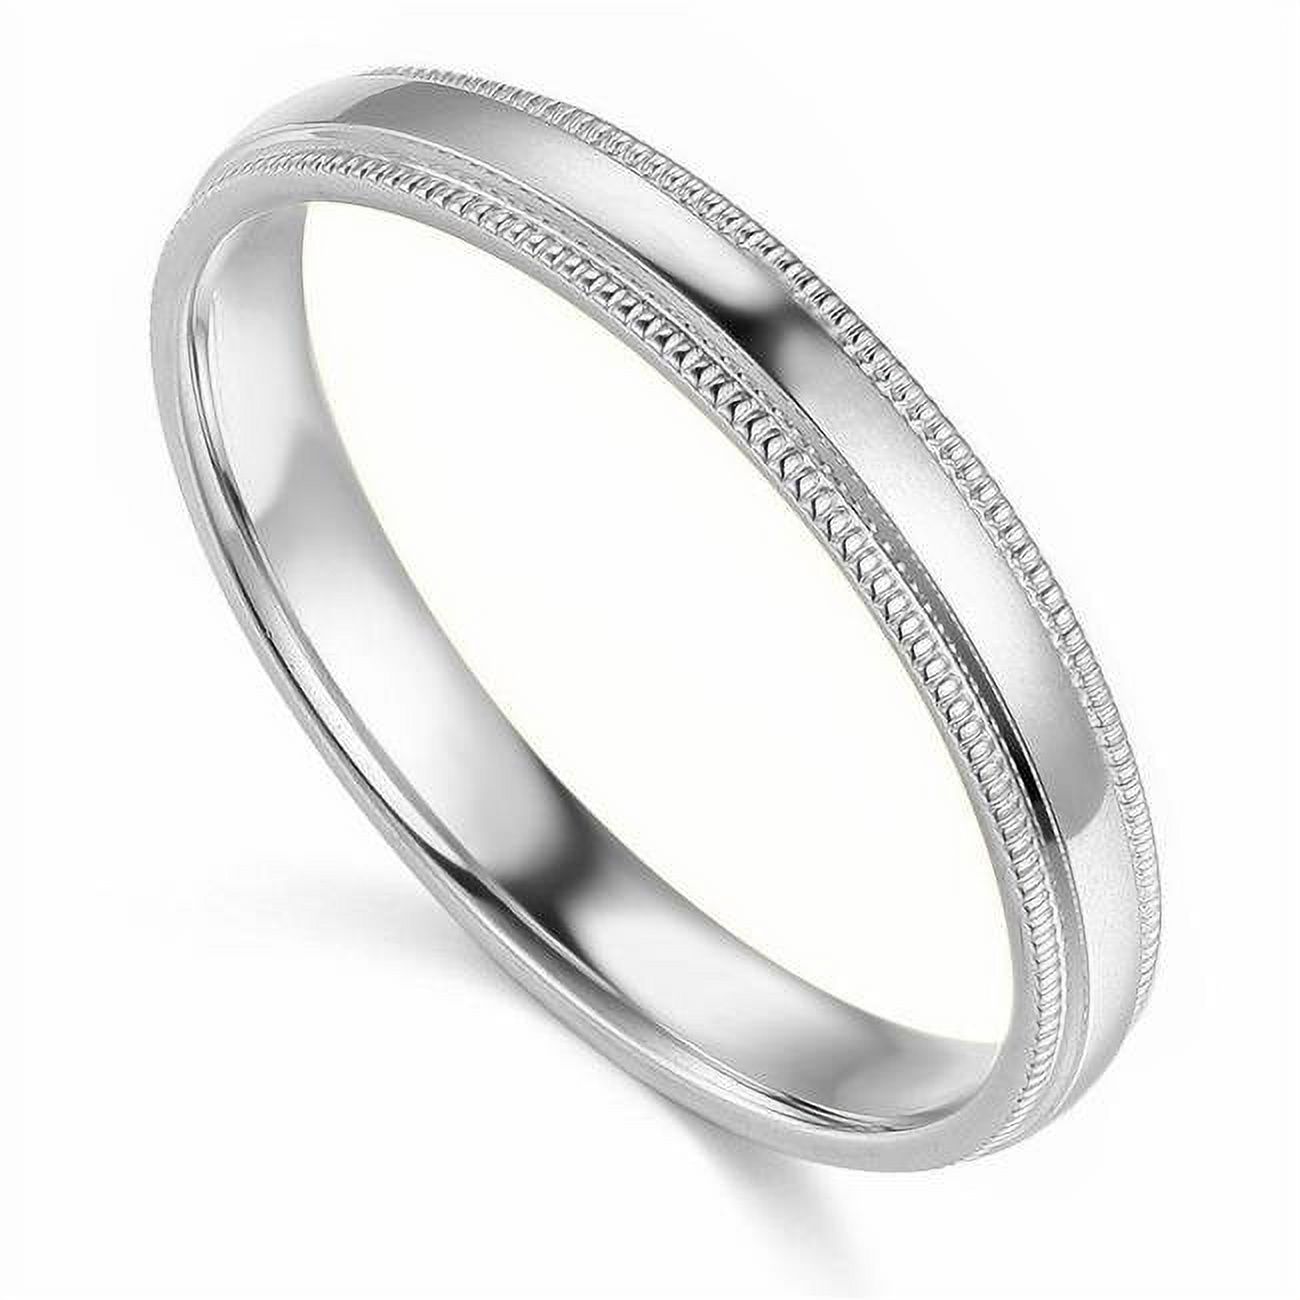 Precious Stars BMR-030W-9.5 Size 9.5 14K White Gold 3 mm Standard-Fit Milgrain & Polished Wedding Band - image 1 of 1